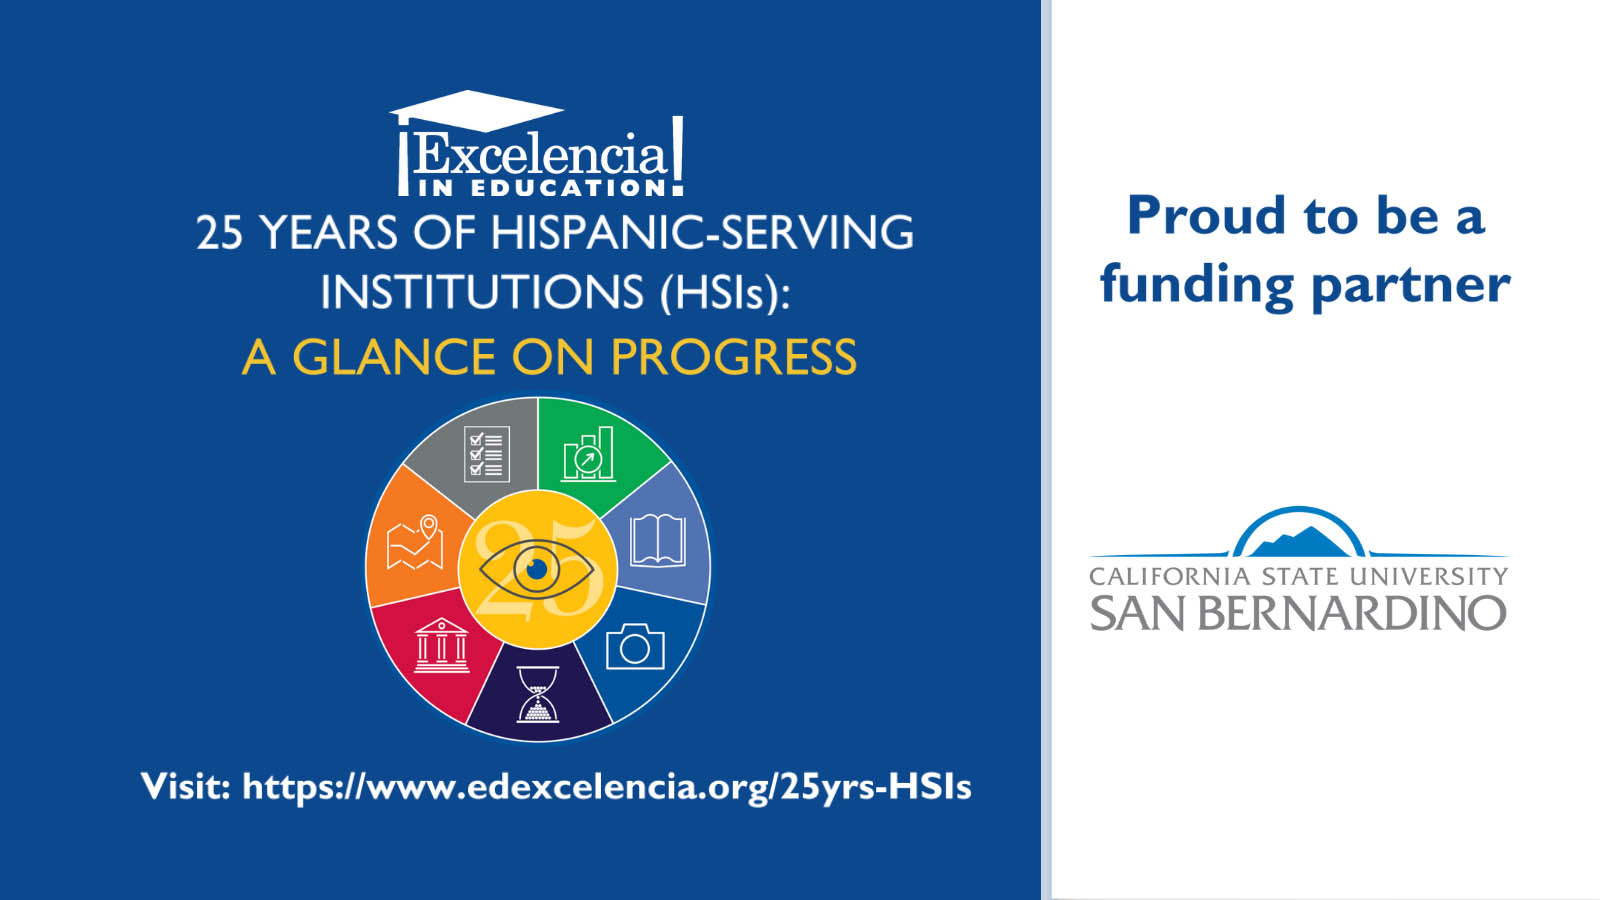 The report was developed with the generous support of the leaders of 14 colleges and universities including Tomás D. Morales, president of Cal State San Bernardino, which has been a Hispanic-Serving Institution since 1994.